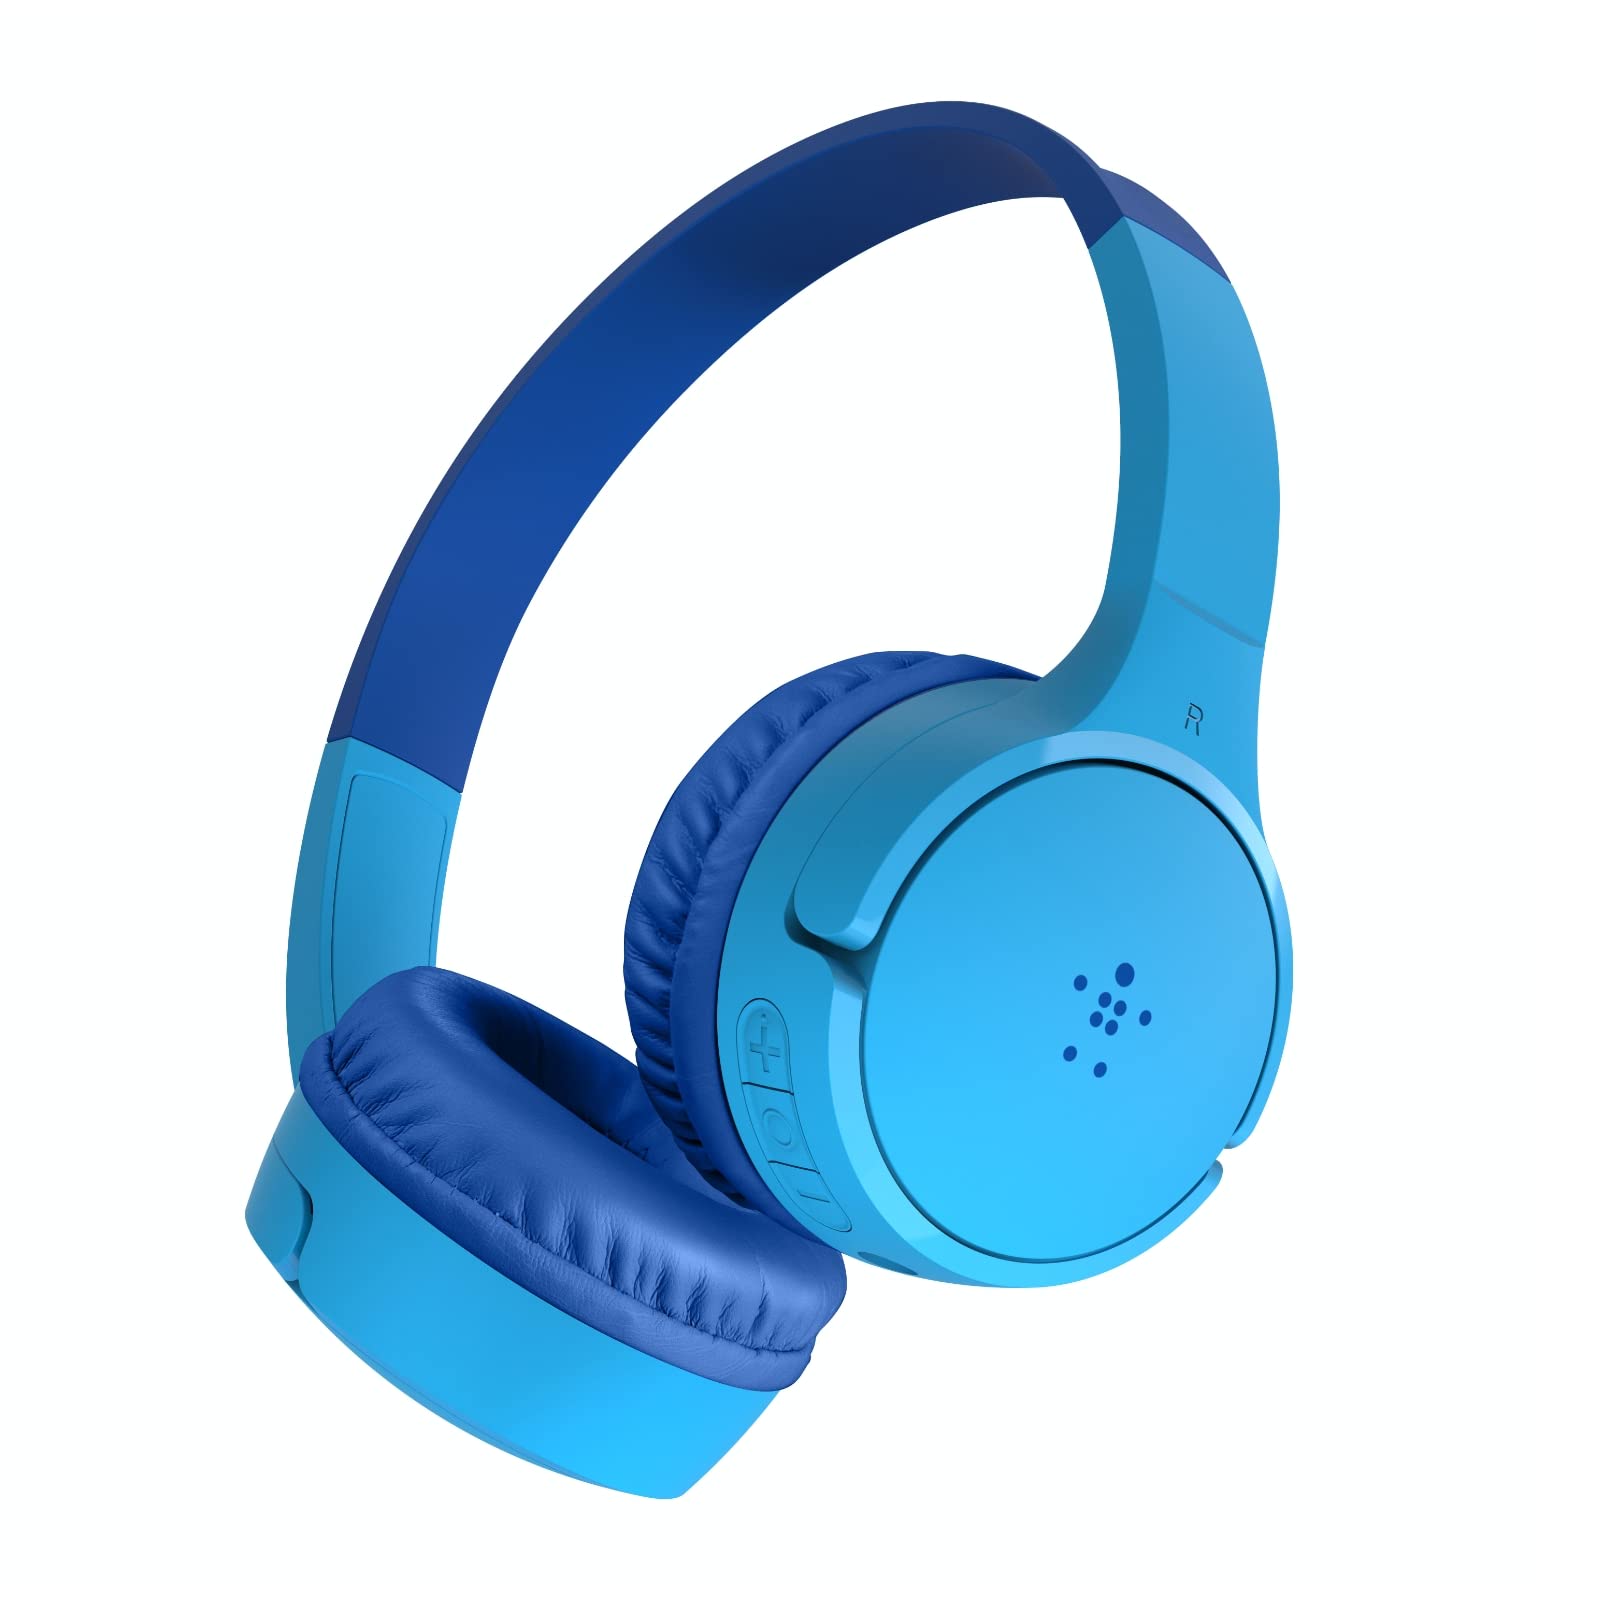 Belkin SoundForm Mini - Wireless Bluetooth Headphones For Kids with Built In Microphone - Kids On-Ear Headphones Wireless Bluetooth - Bluetooth Earphones for iPhone, iPad, Fire Tablet & more - Blue